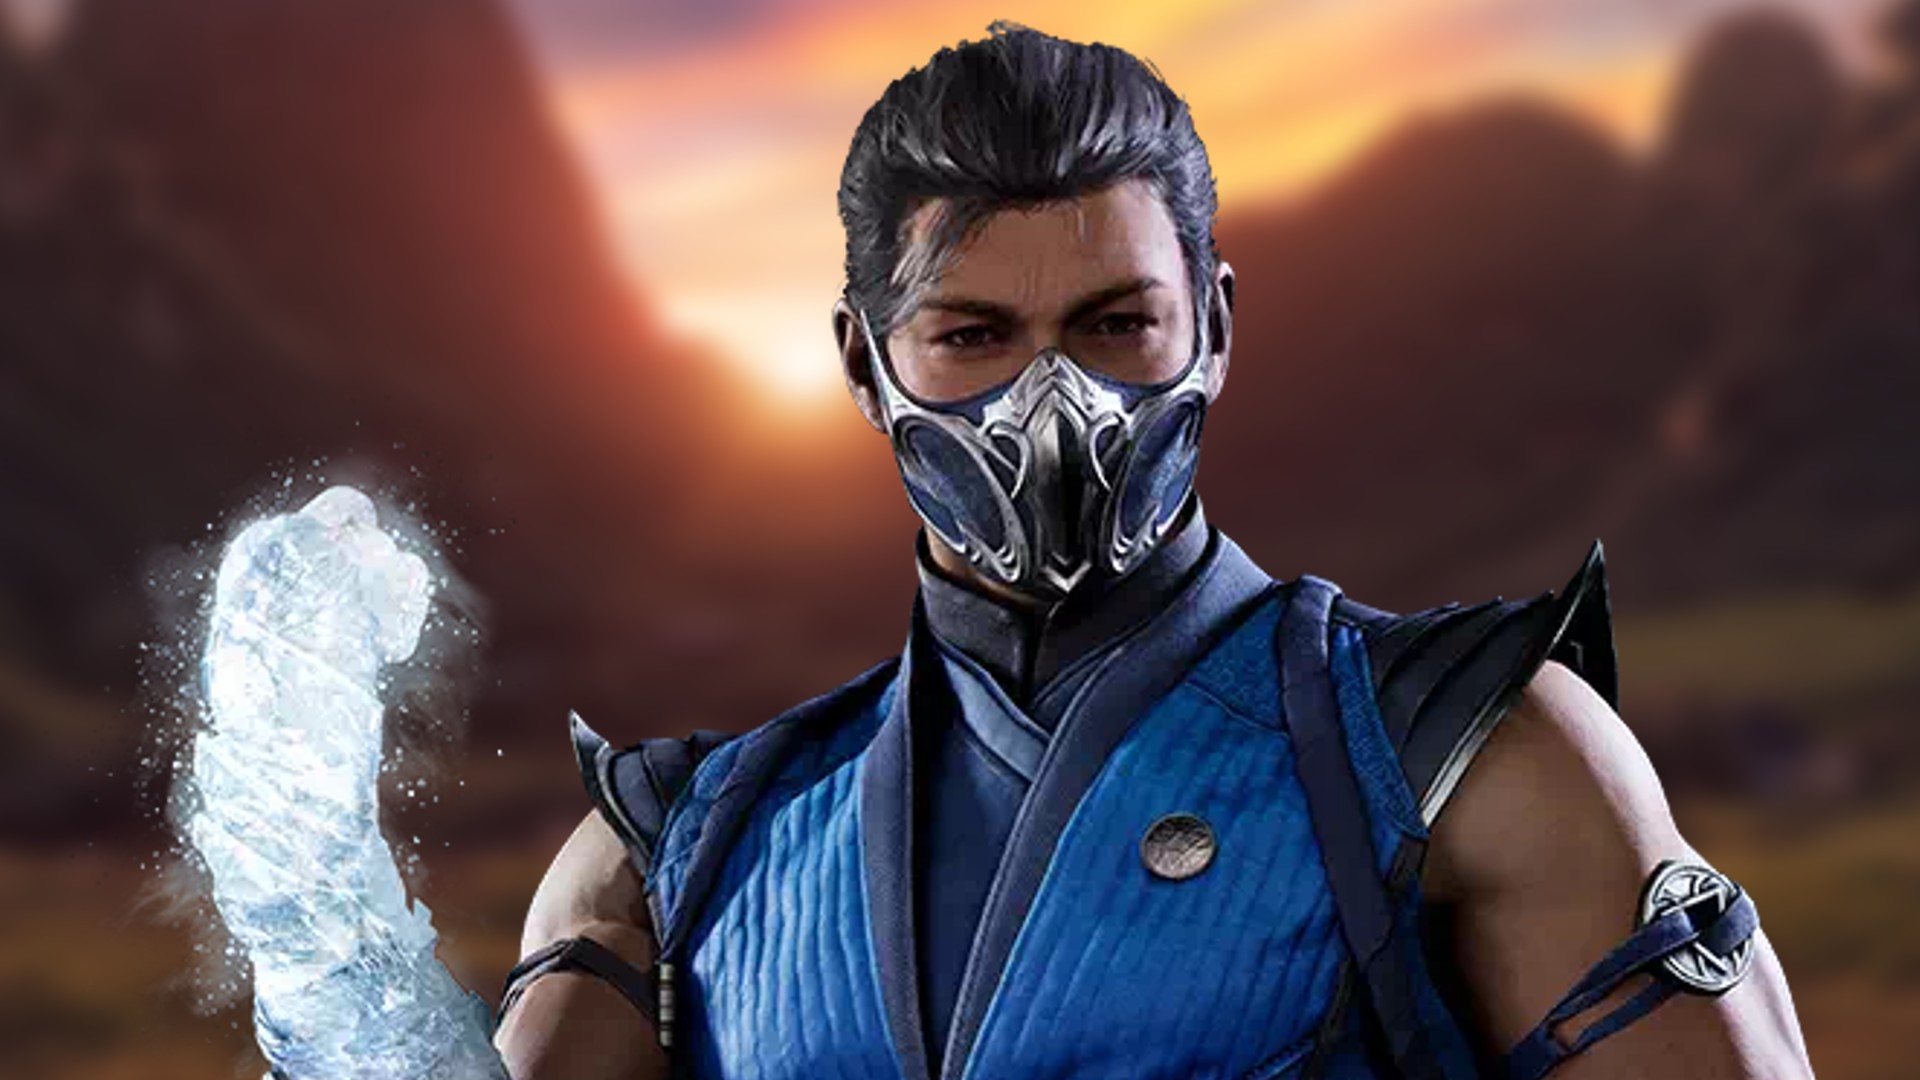 Mortal Kombat 1 Closed Beta - Extended Ending Time and How to Play